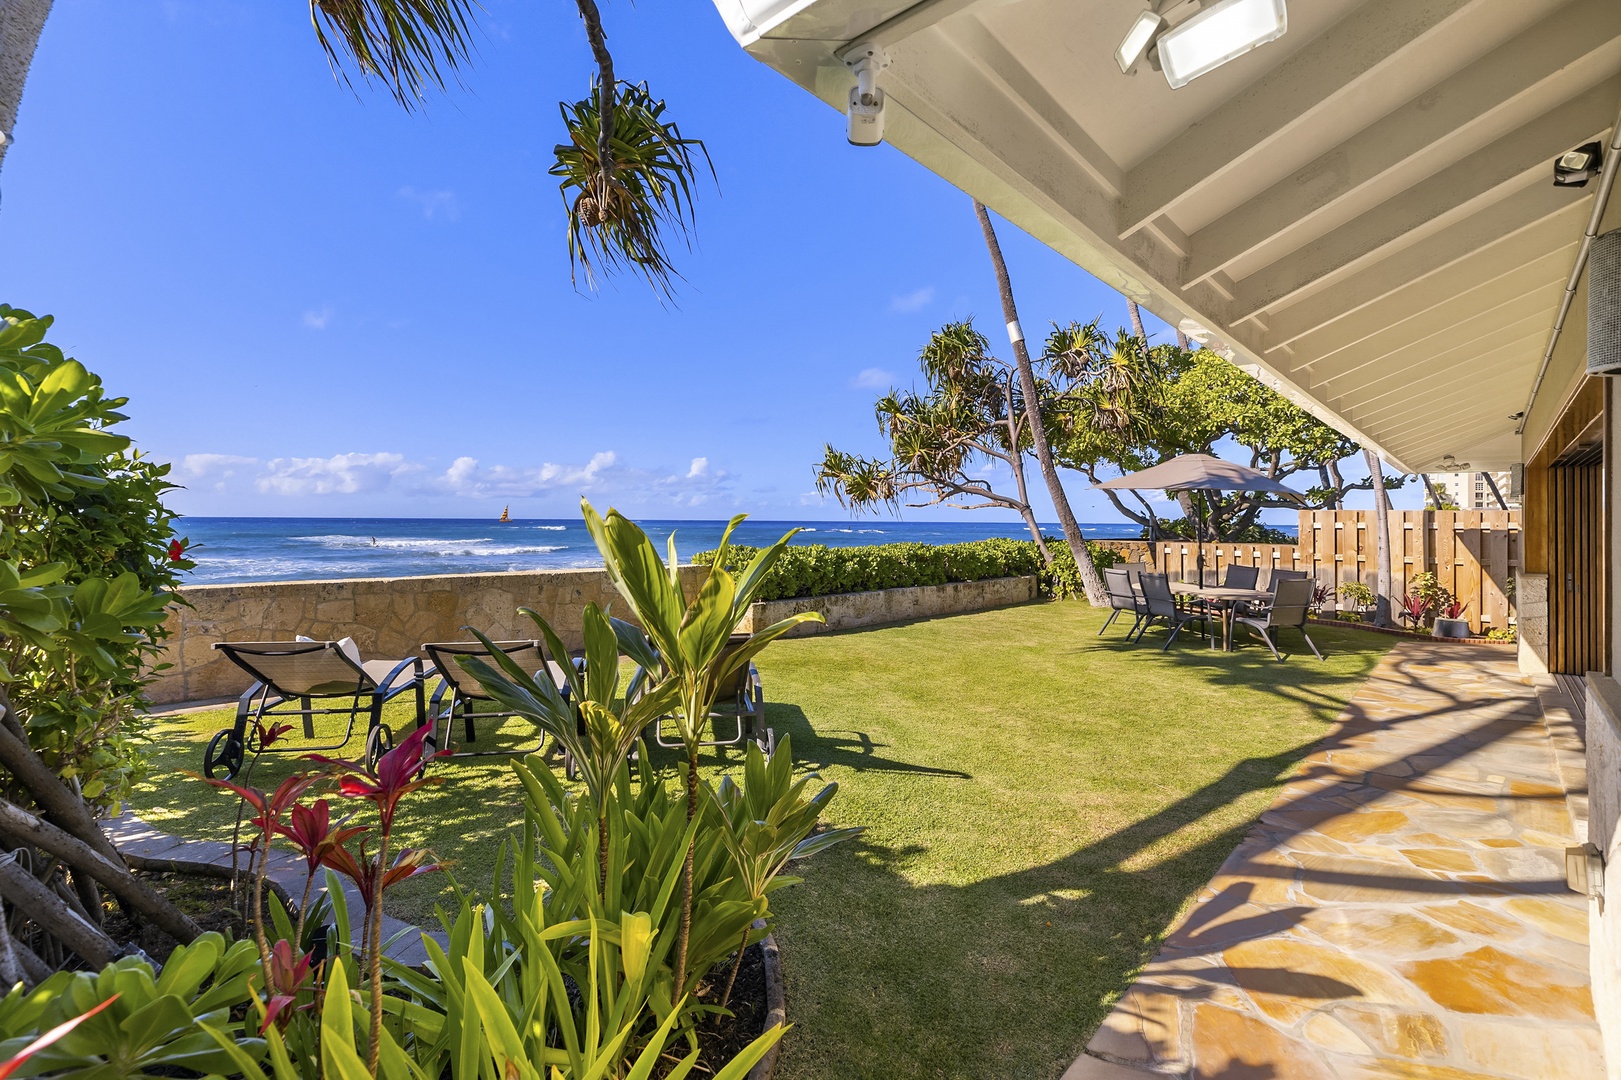 Honolulu Vacation Rentals, Hale Makai at Diamond Head - Oceanside yard with outdoor seating with umbrella.